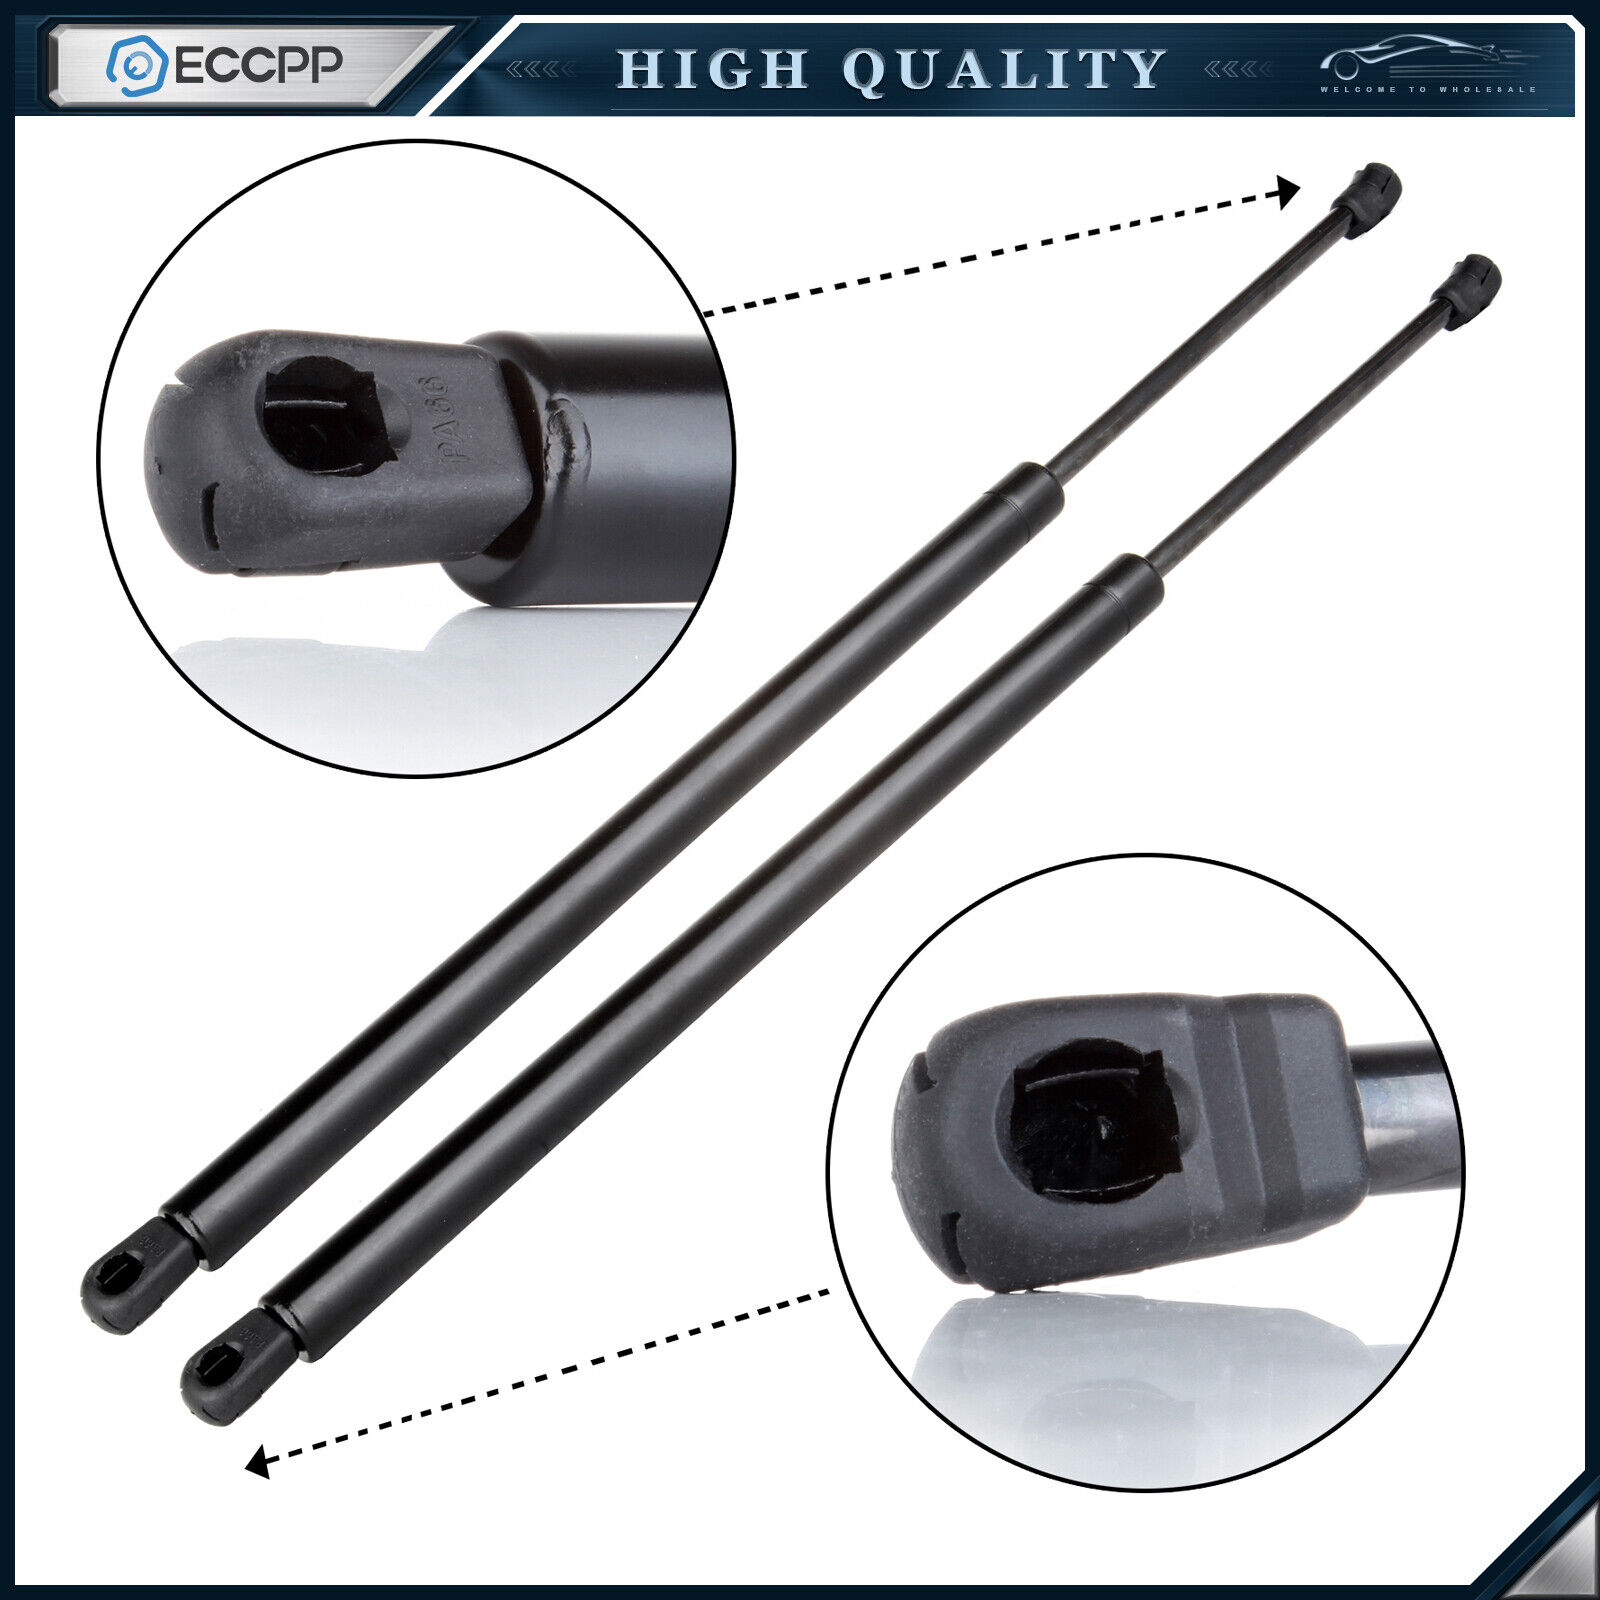 ECCPP 2x Liftgate Lift Supports Struts Gas Springs For GMC Envoy XL 2002-06 4574